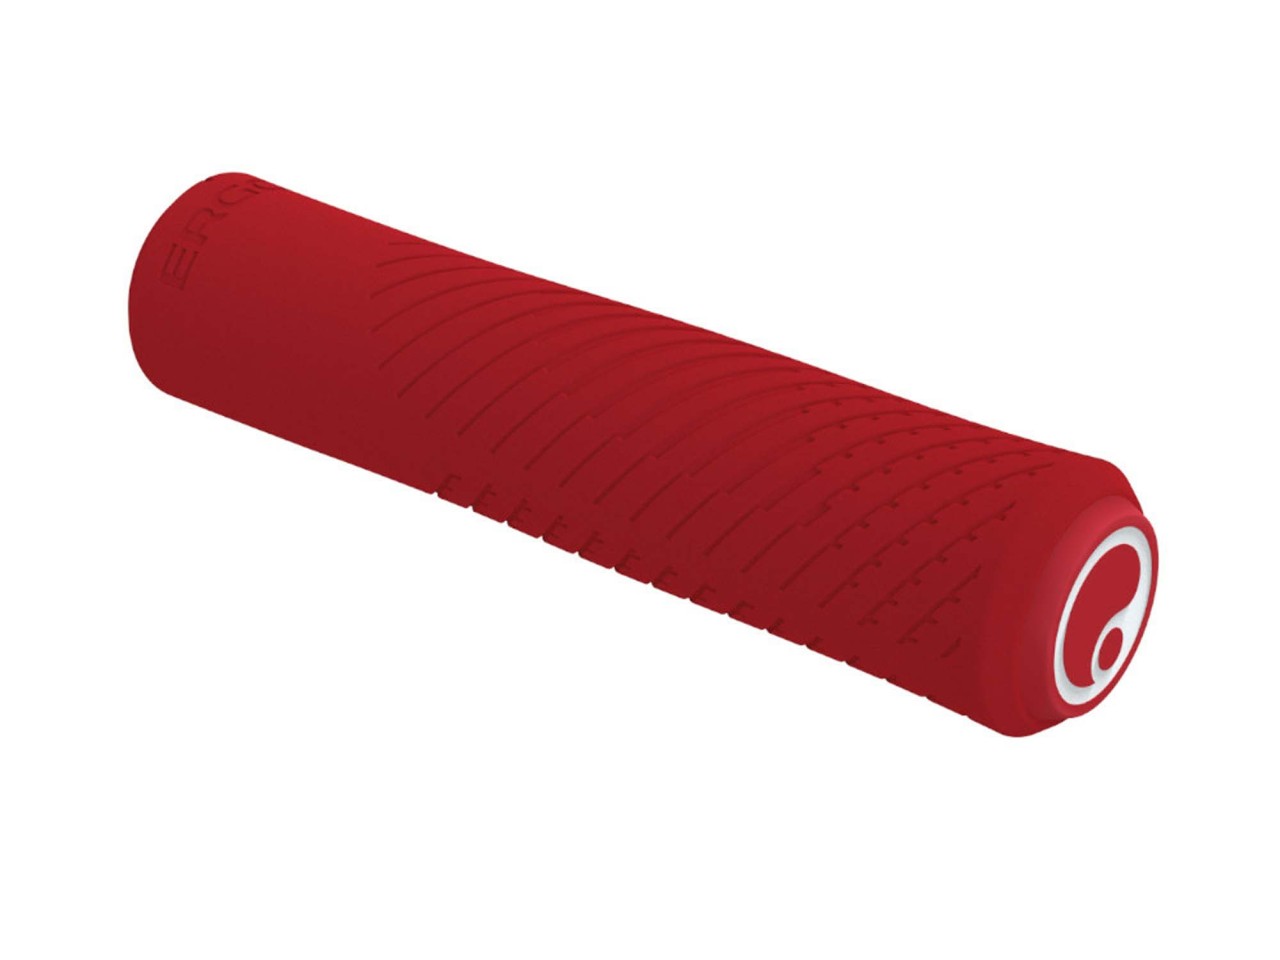 Ergon Grips GXR large, risky red